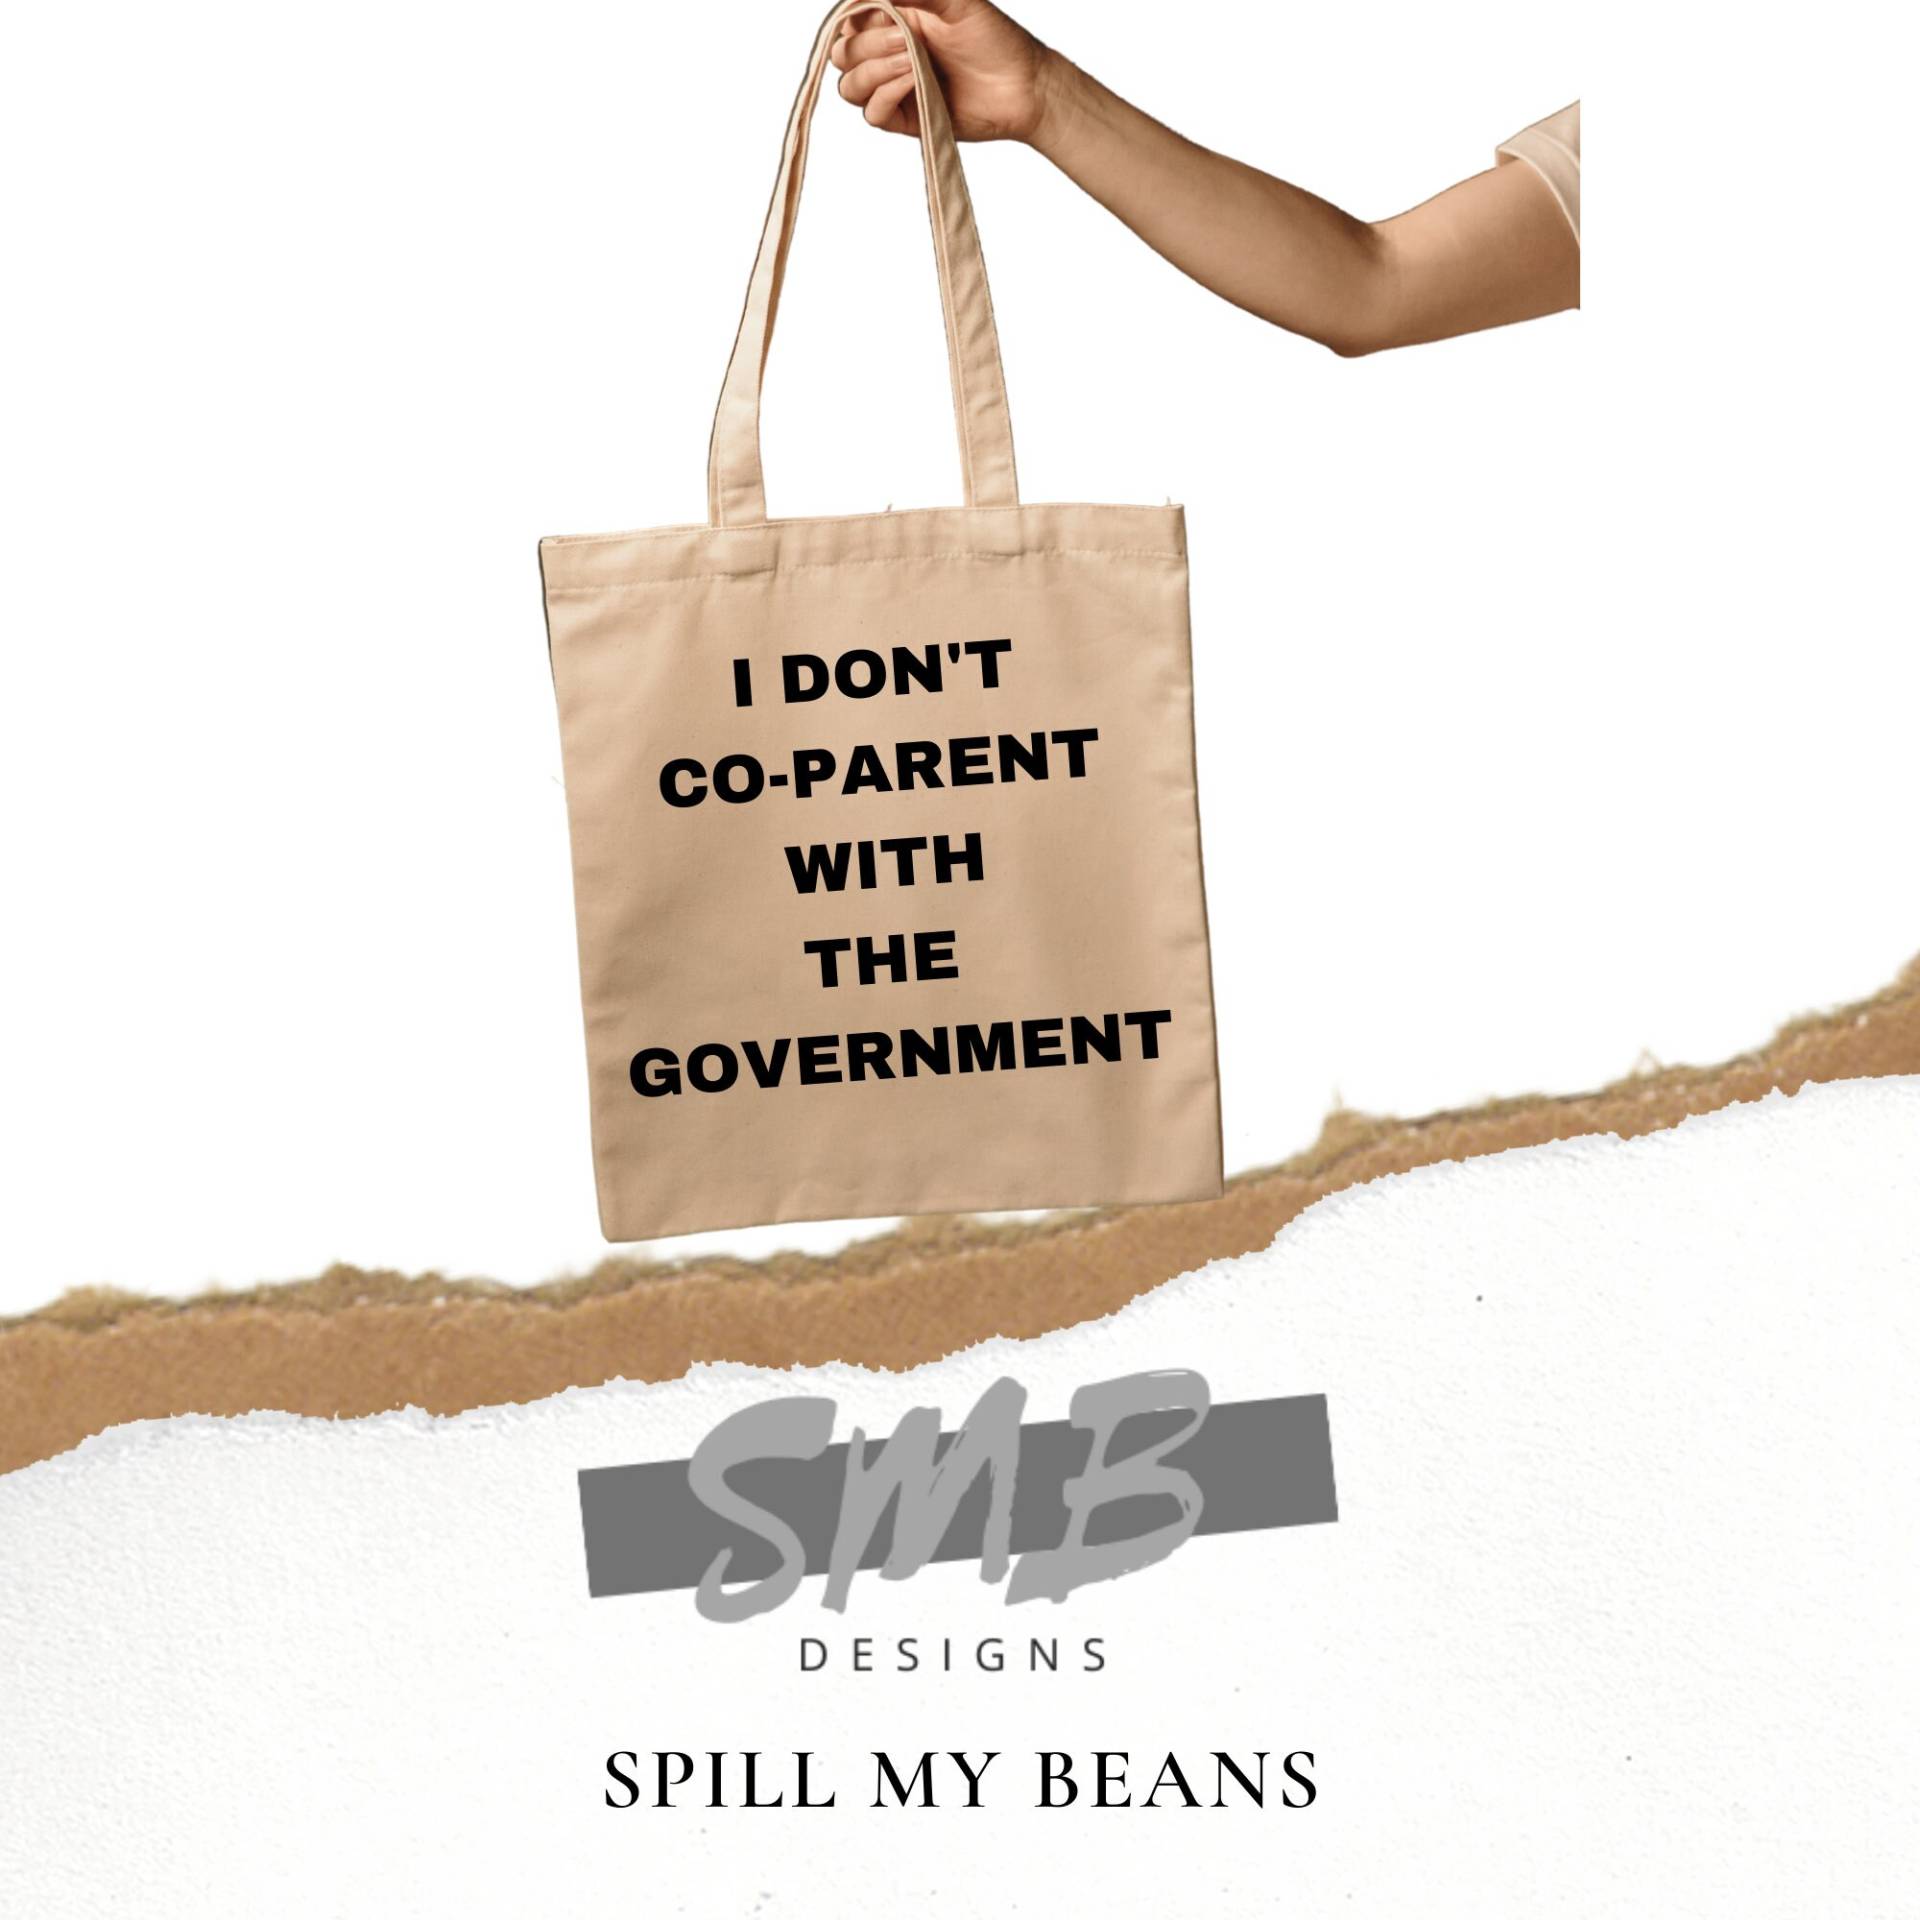 I Don't Co-Parent With The Government Tote Bag, 14x16, Baumwolle, Naturfarbe, Usa, Patriot, Bags, Trendy, Weich von SpillMyBeans